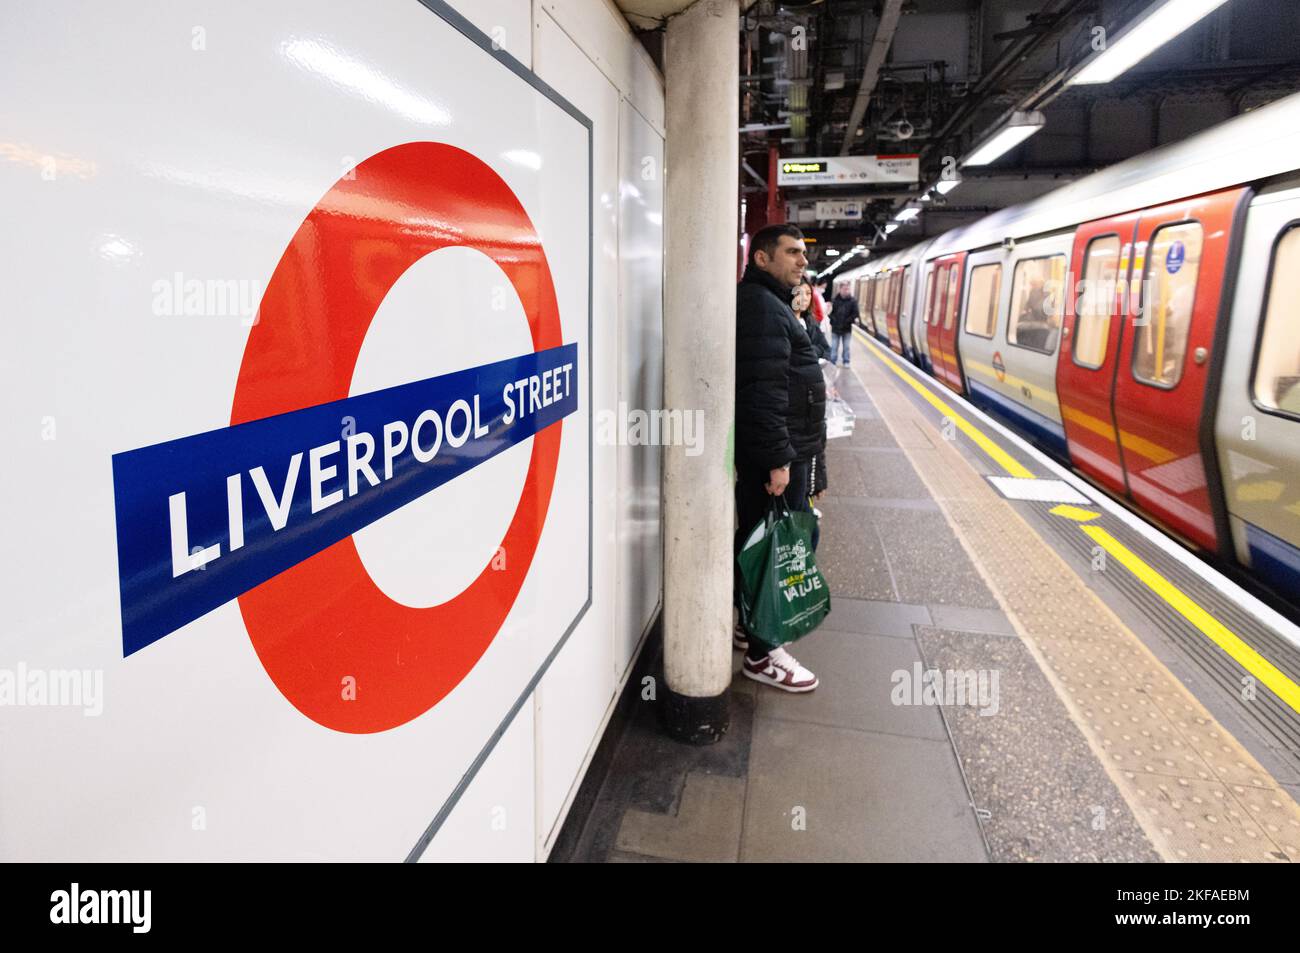 Liverpool Street Underground Station interior, sign and platform,train and people, Public transport, London Tube system, London UK Stock Photo